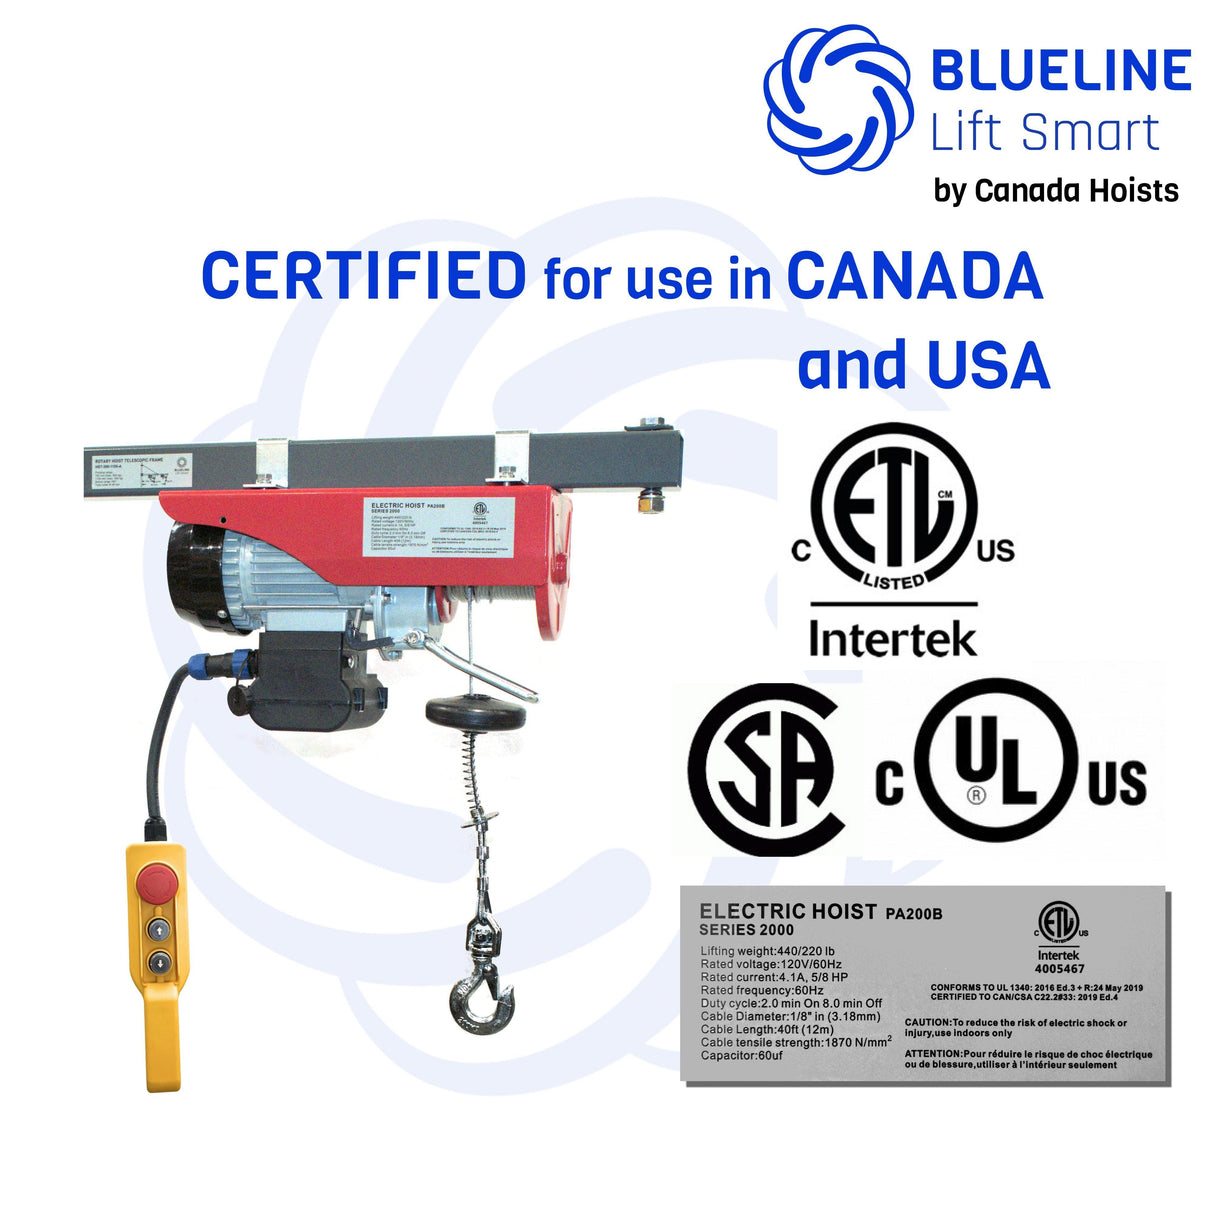 2200 lb (1000kg) BLUELINE Electric Hoist SERIES 2000 with TWO(2) x 6FT Wired Remote Controls + Multi-Control Box